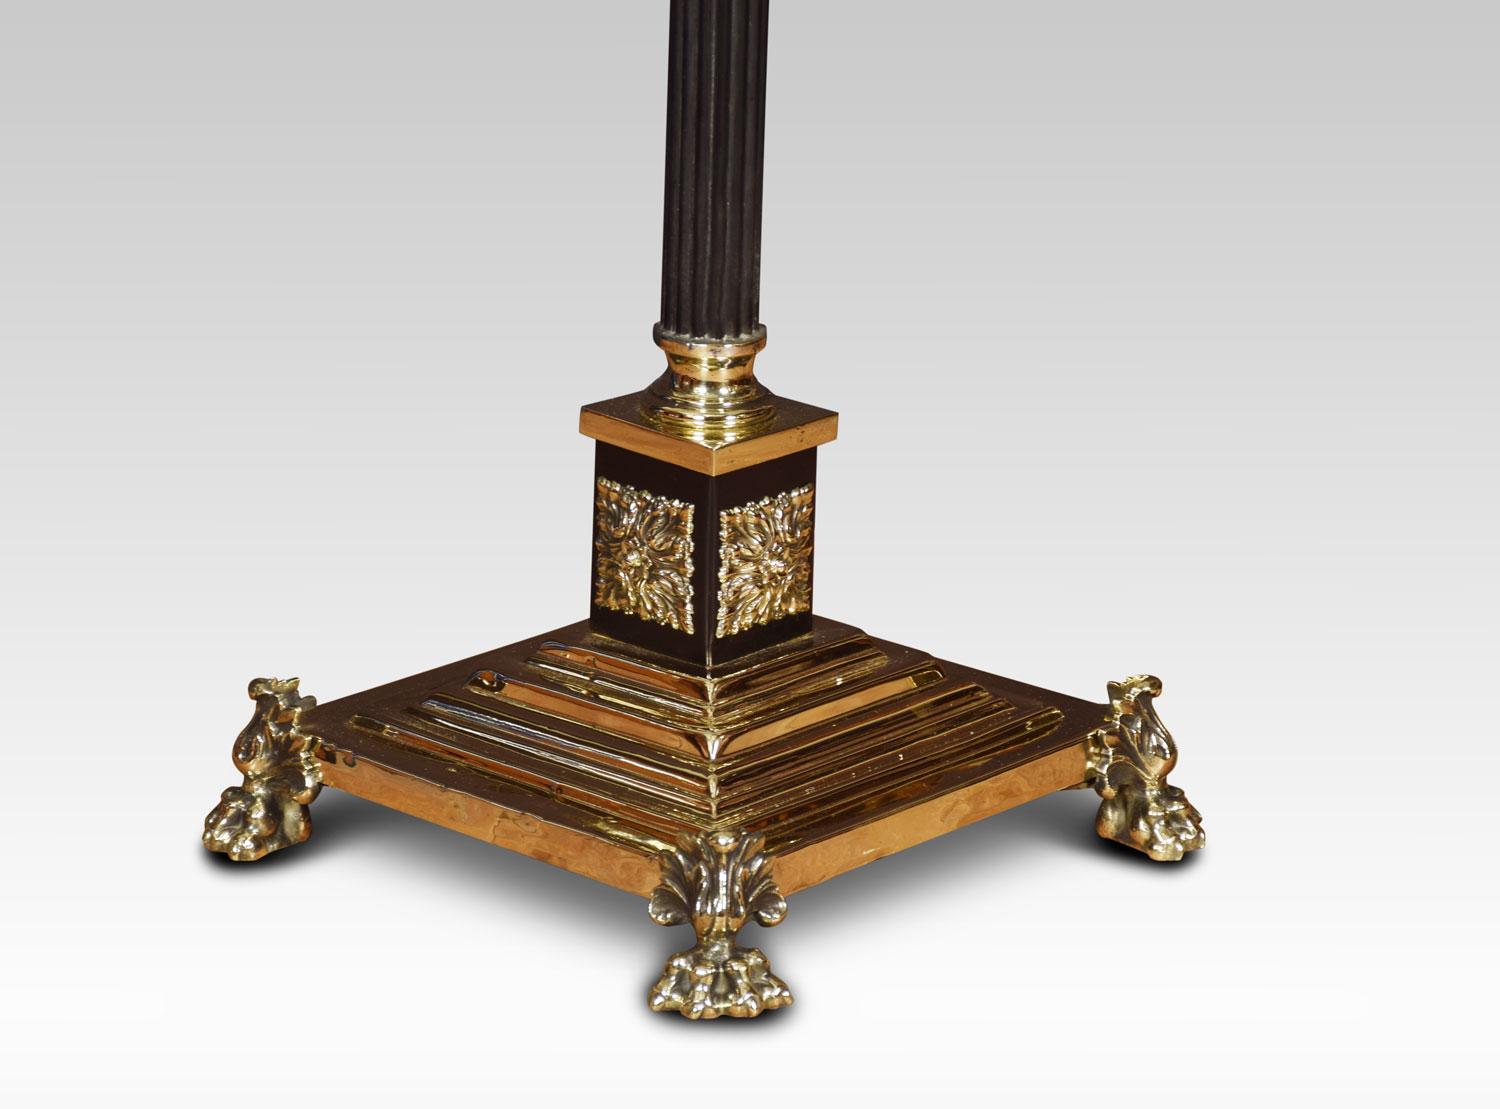 19th century brass standard lamp. Having ebonized Corinthian column and adjustable stem, on large stepped square base with paw feet. The lamp has been rewired.
Dimensions:
Height 52 inches adjustable to 86 inches
Width 13.5 inches
Depth 13.5